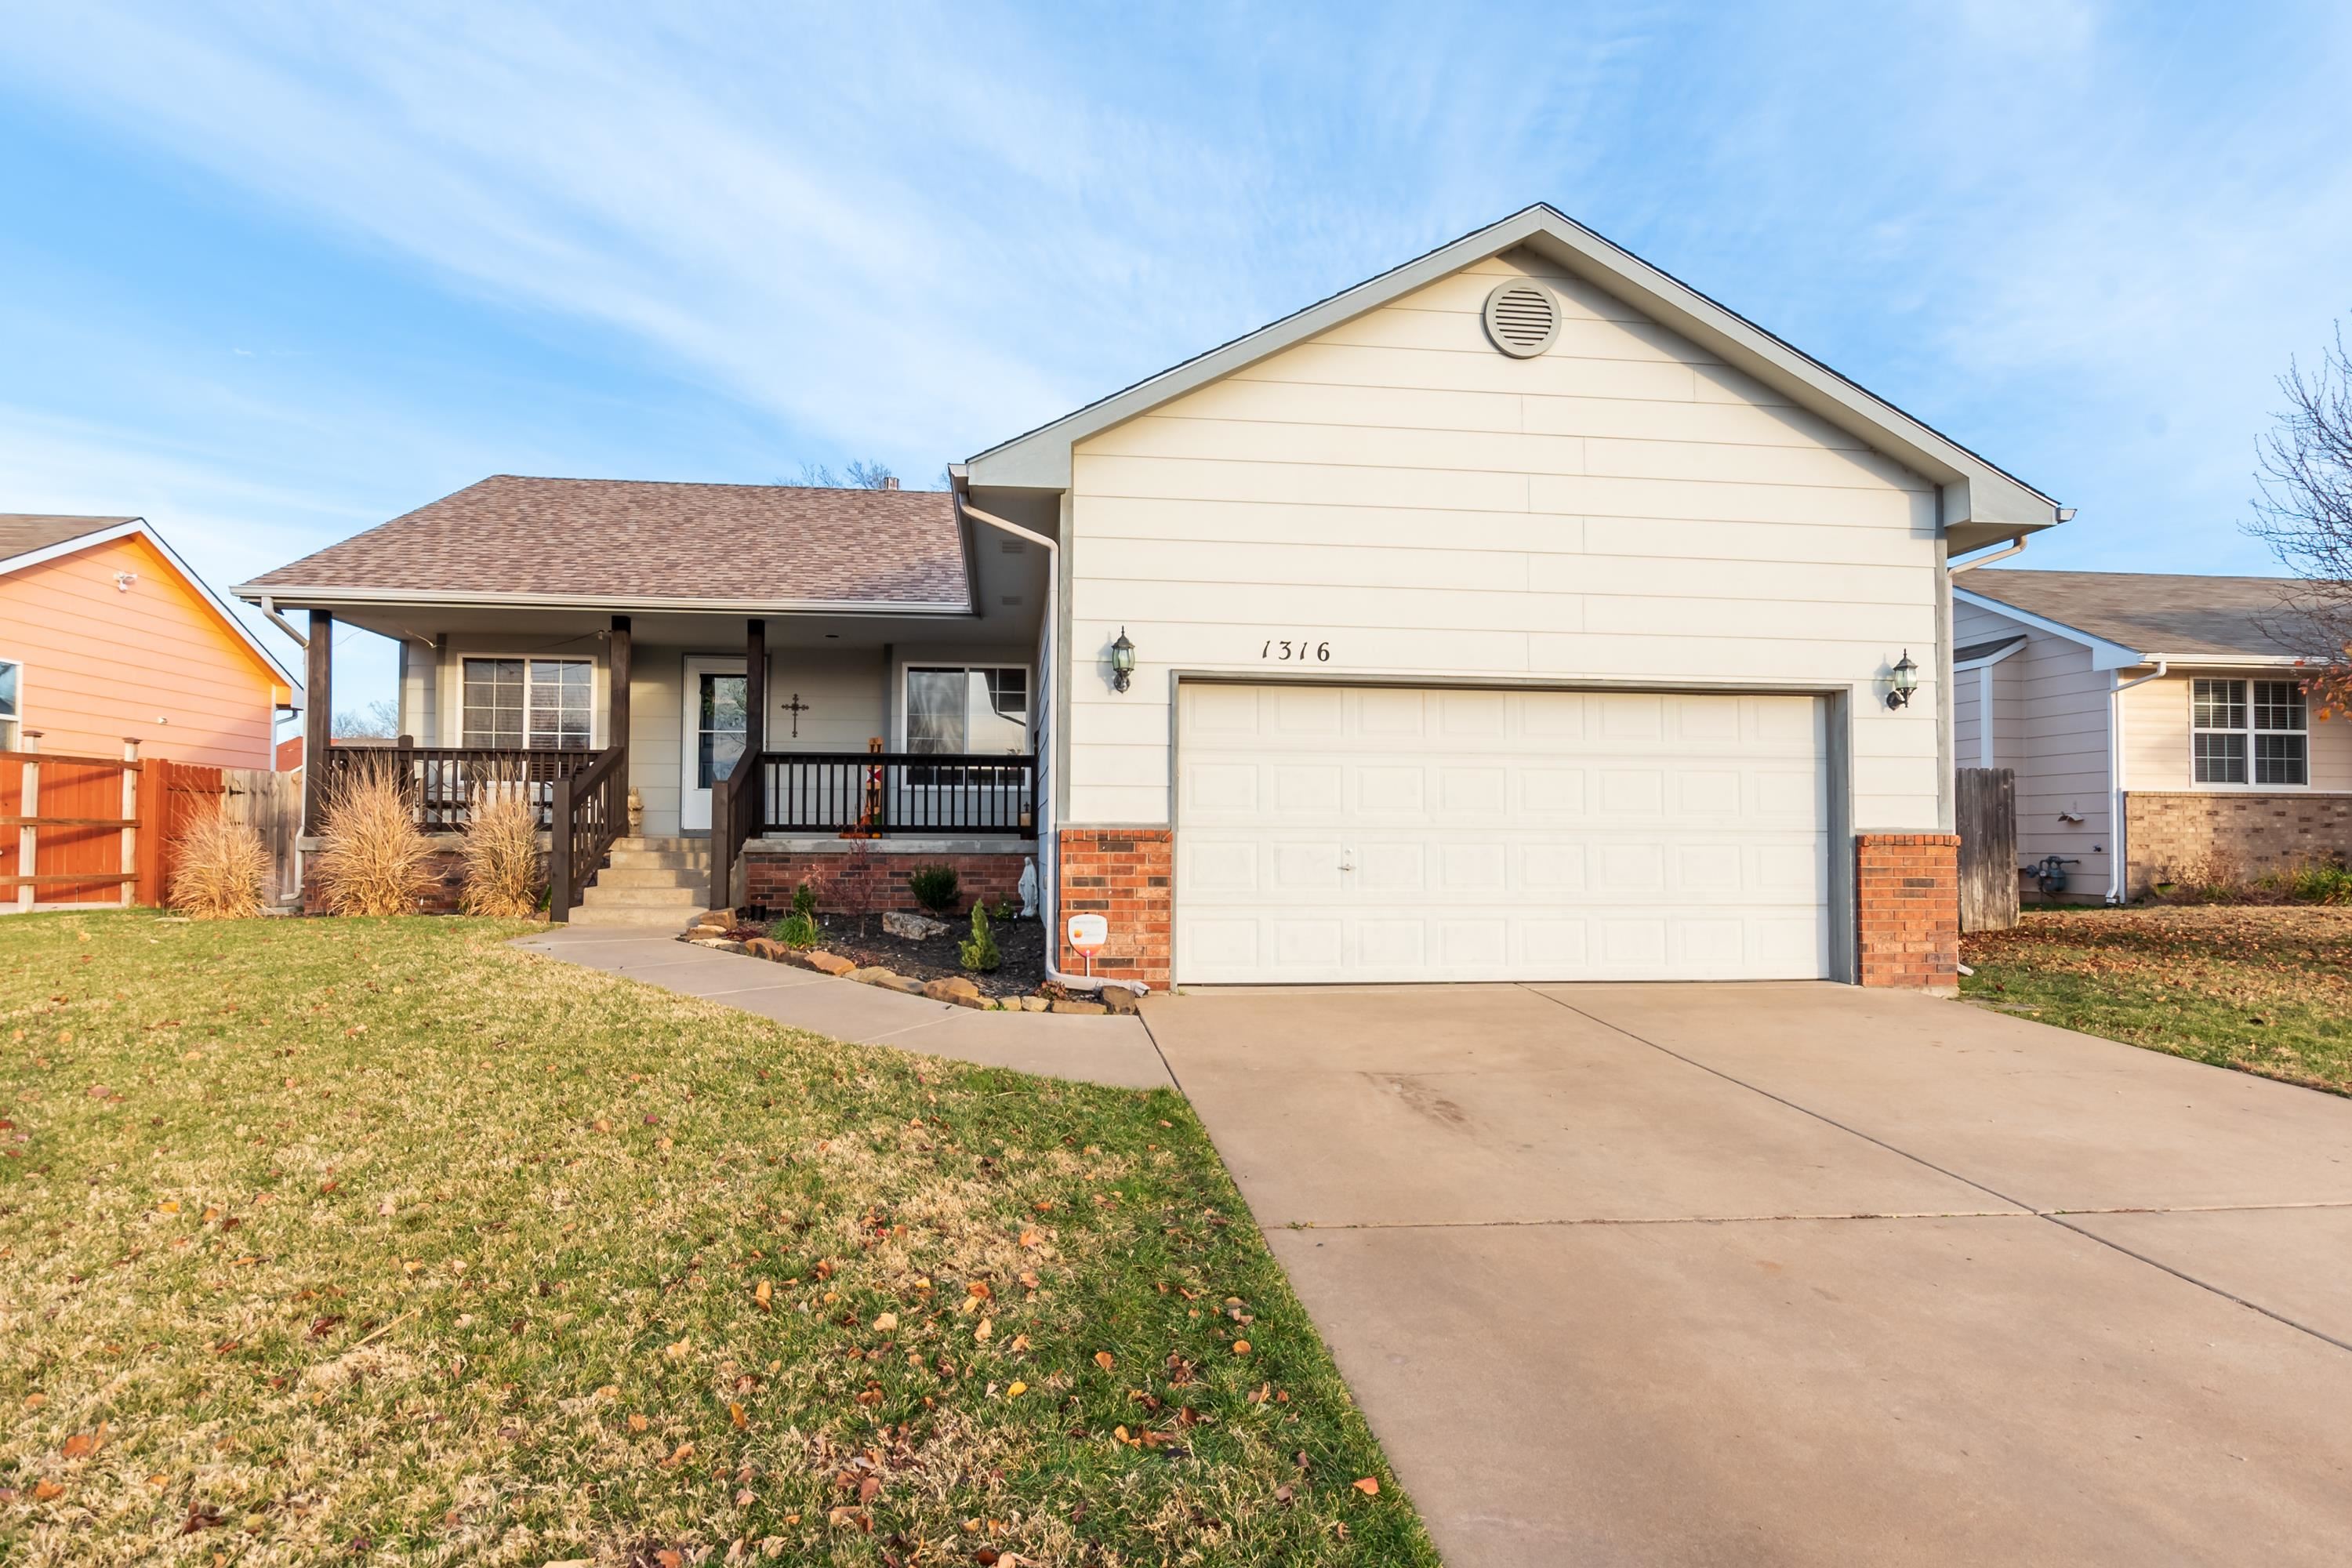 Looking for a beautiful home in NW Wichita??  This is the one for you - Open floor plan with vaulted